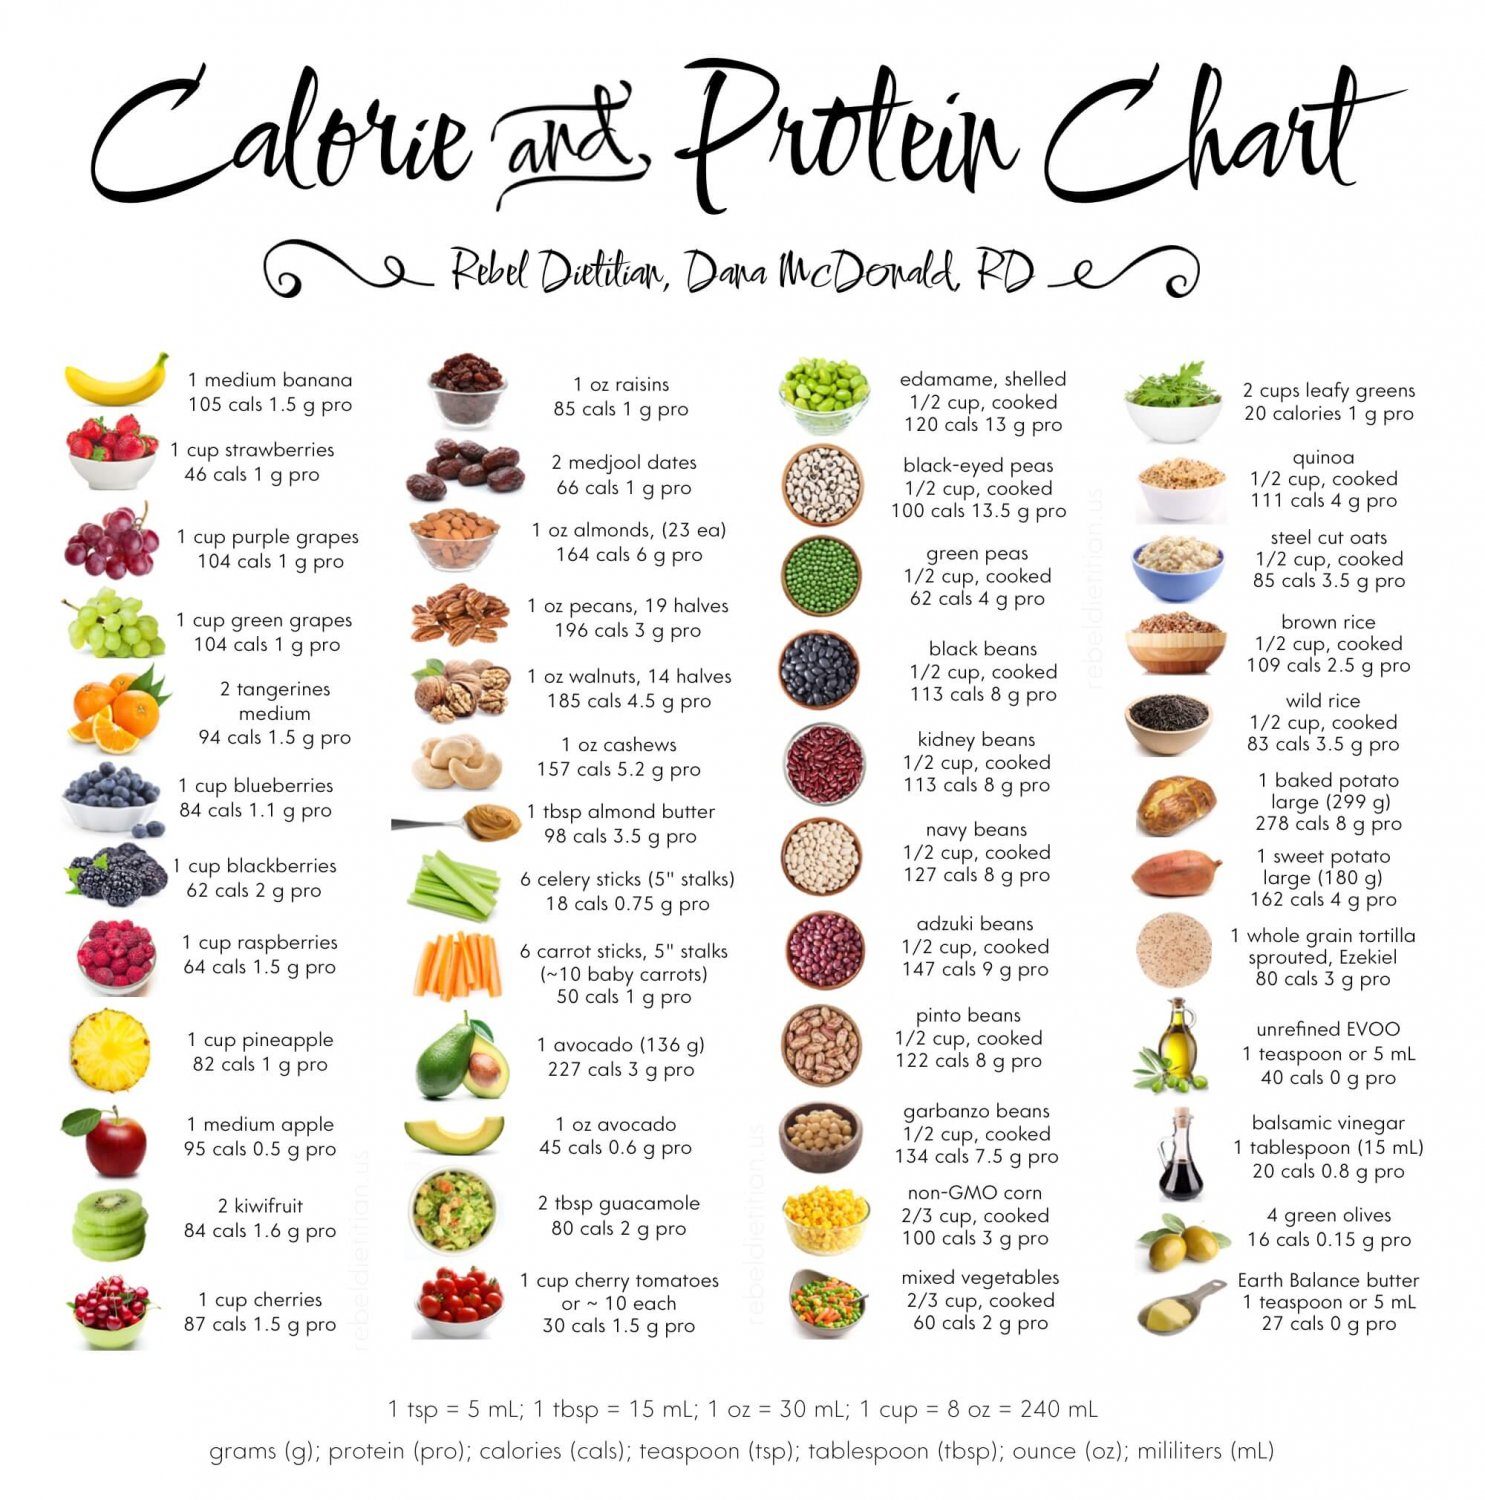 calorie-and-protein-chart-18-x28-45cm-70cm-poster